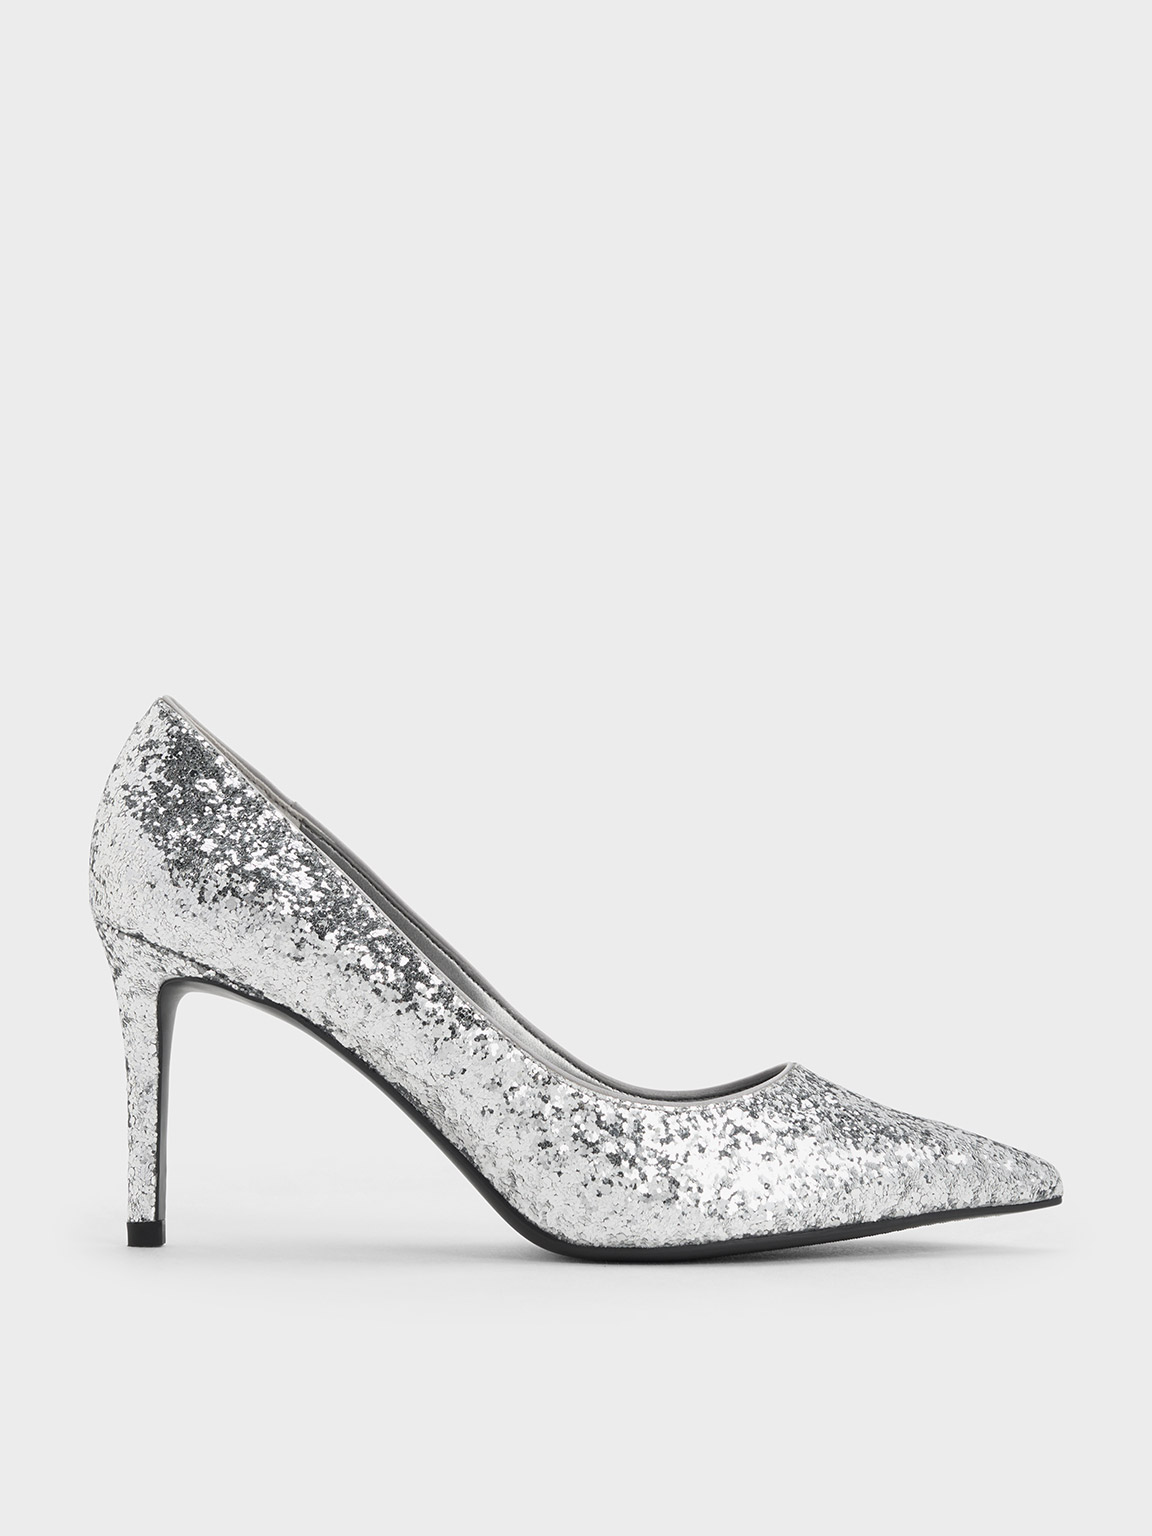 The Best Party-Ready Sparkly Silver Heels to Shop Now | Who What Wear UK